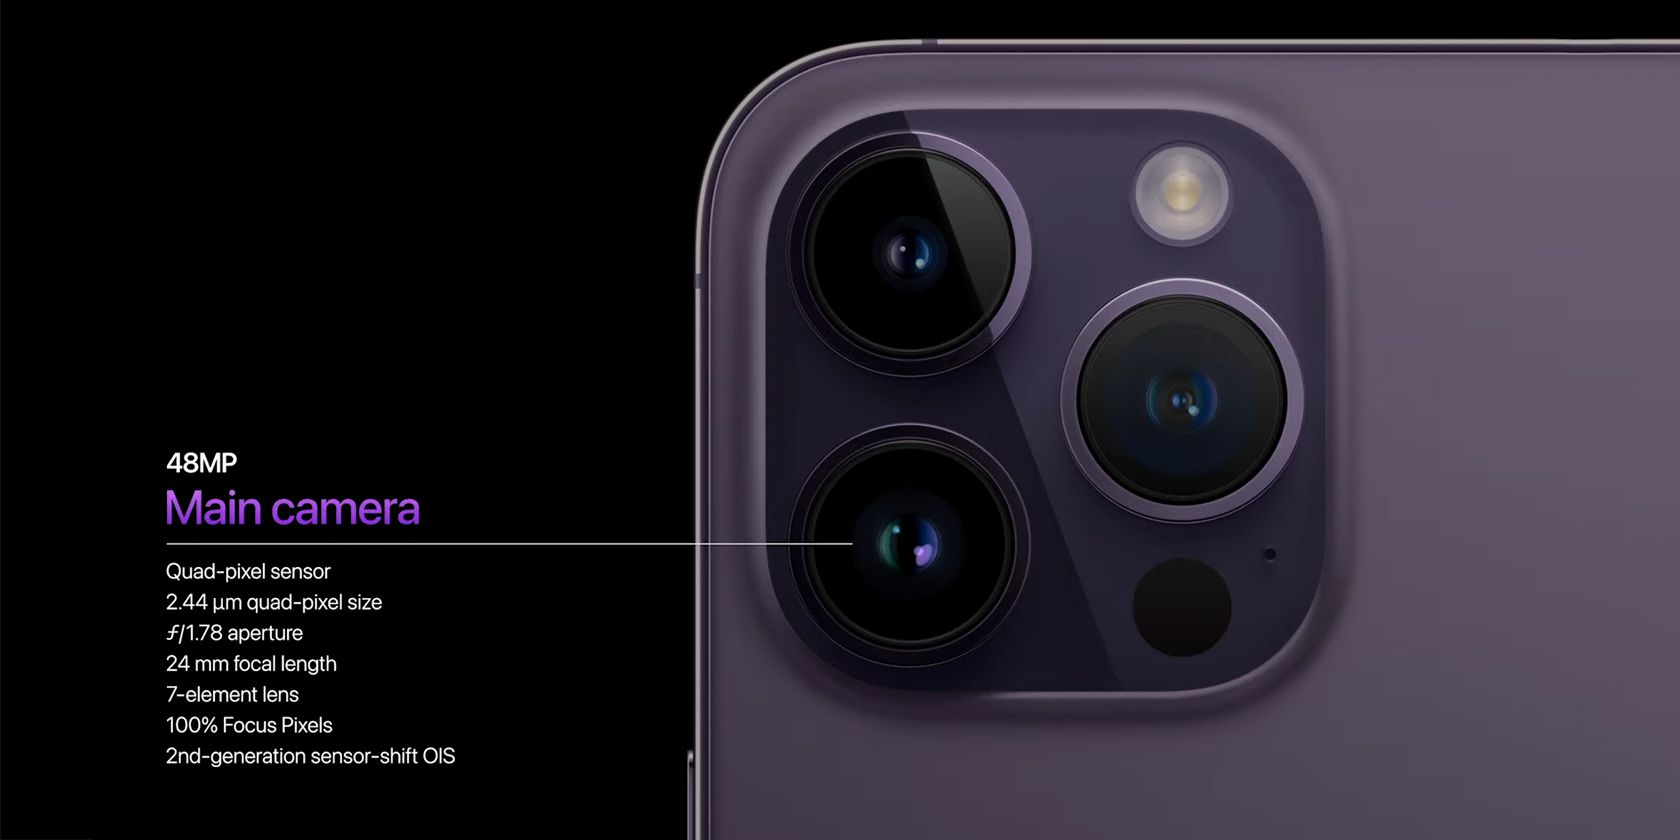 48MP Main Camera on the iPhone 14 Pro